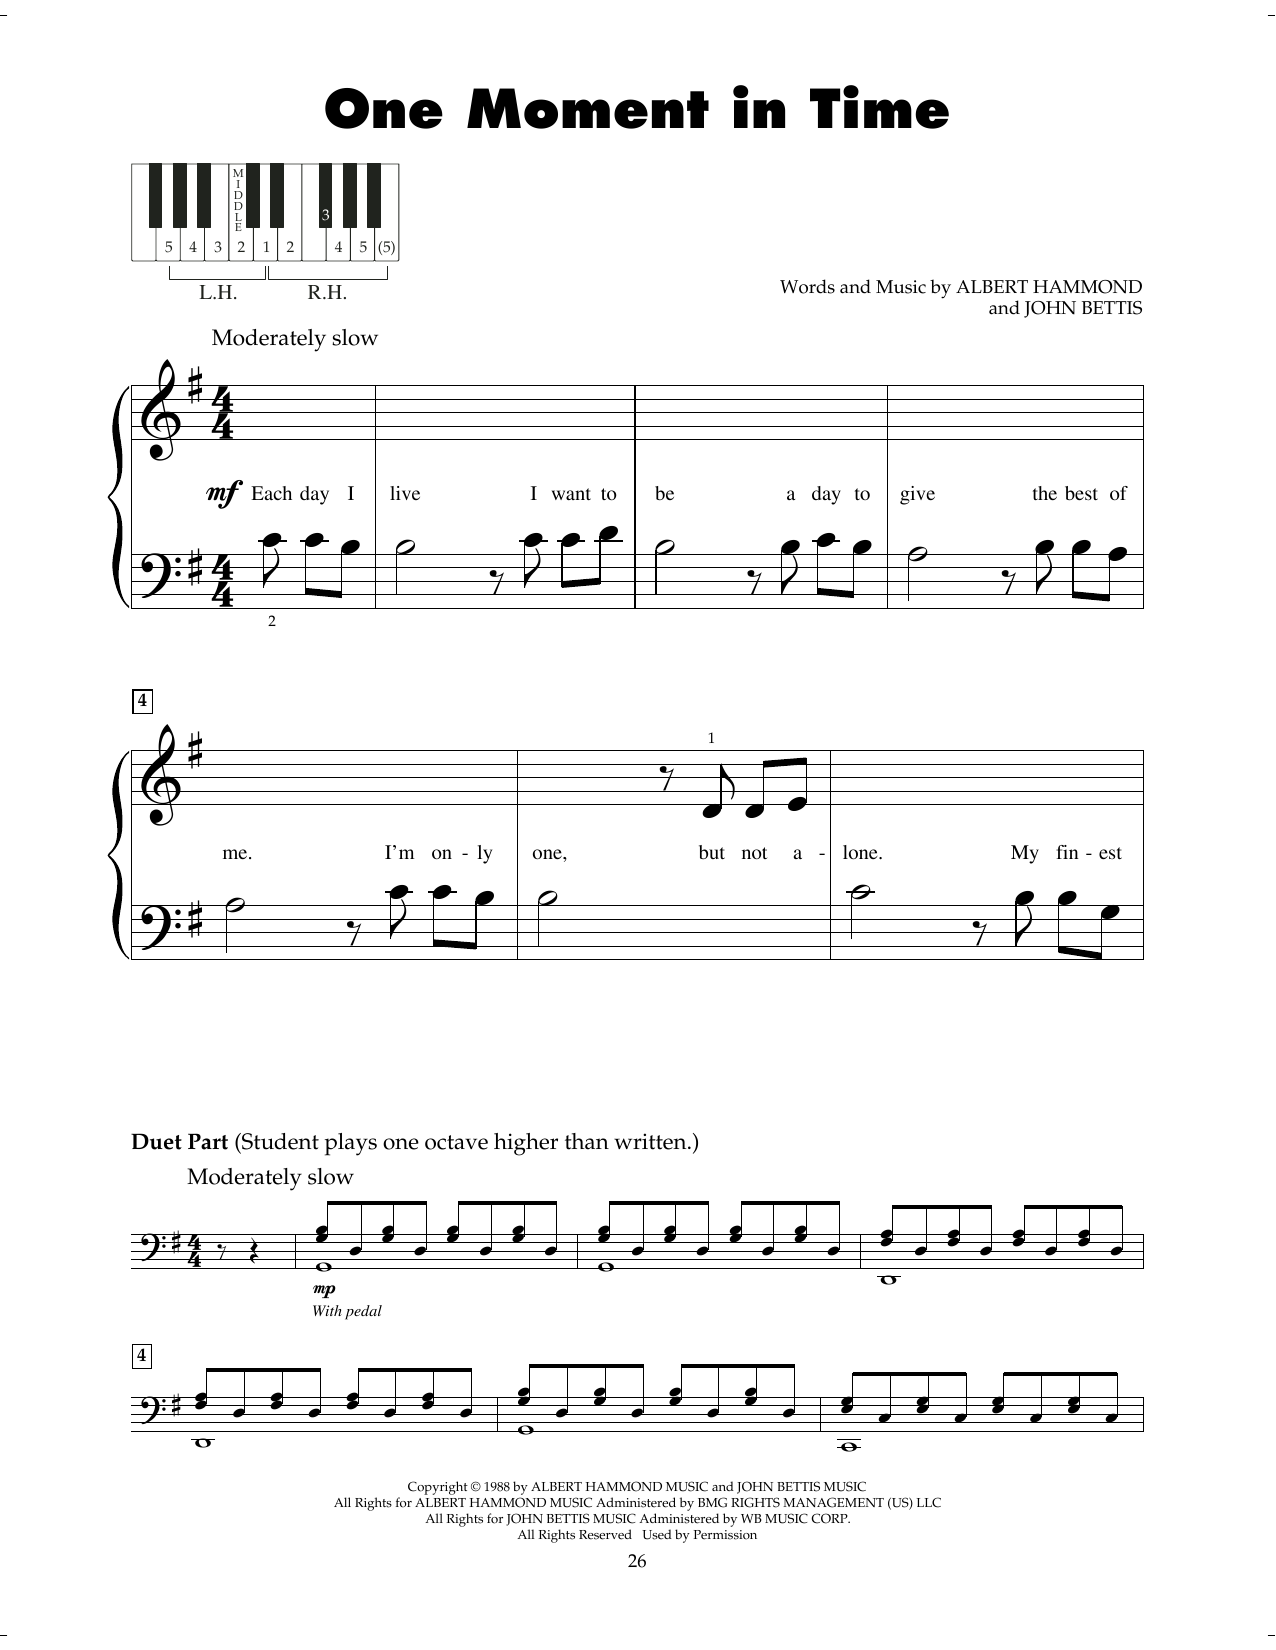 Whitney Houston One Moment In Time sheet music notes printable PDF score